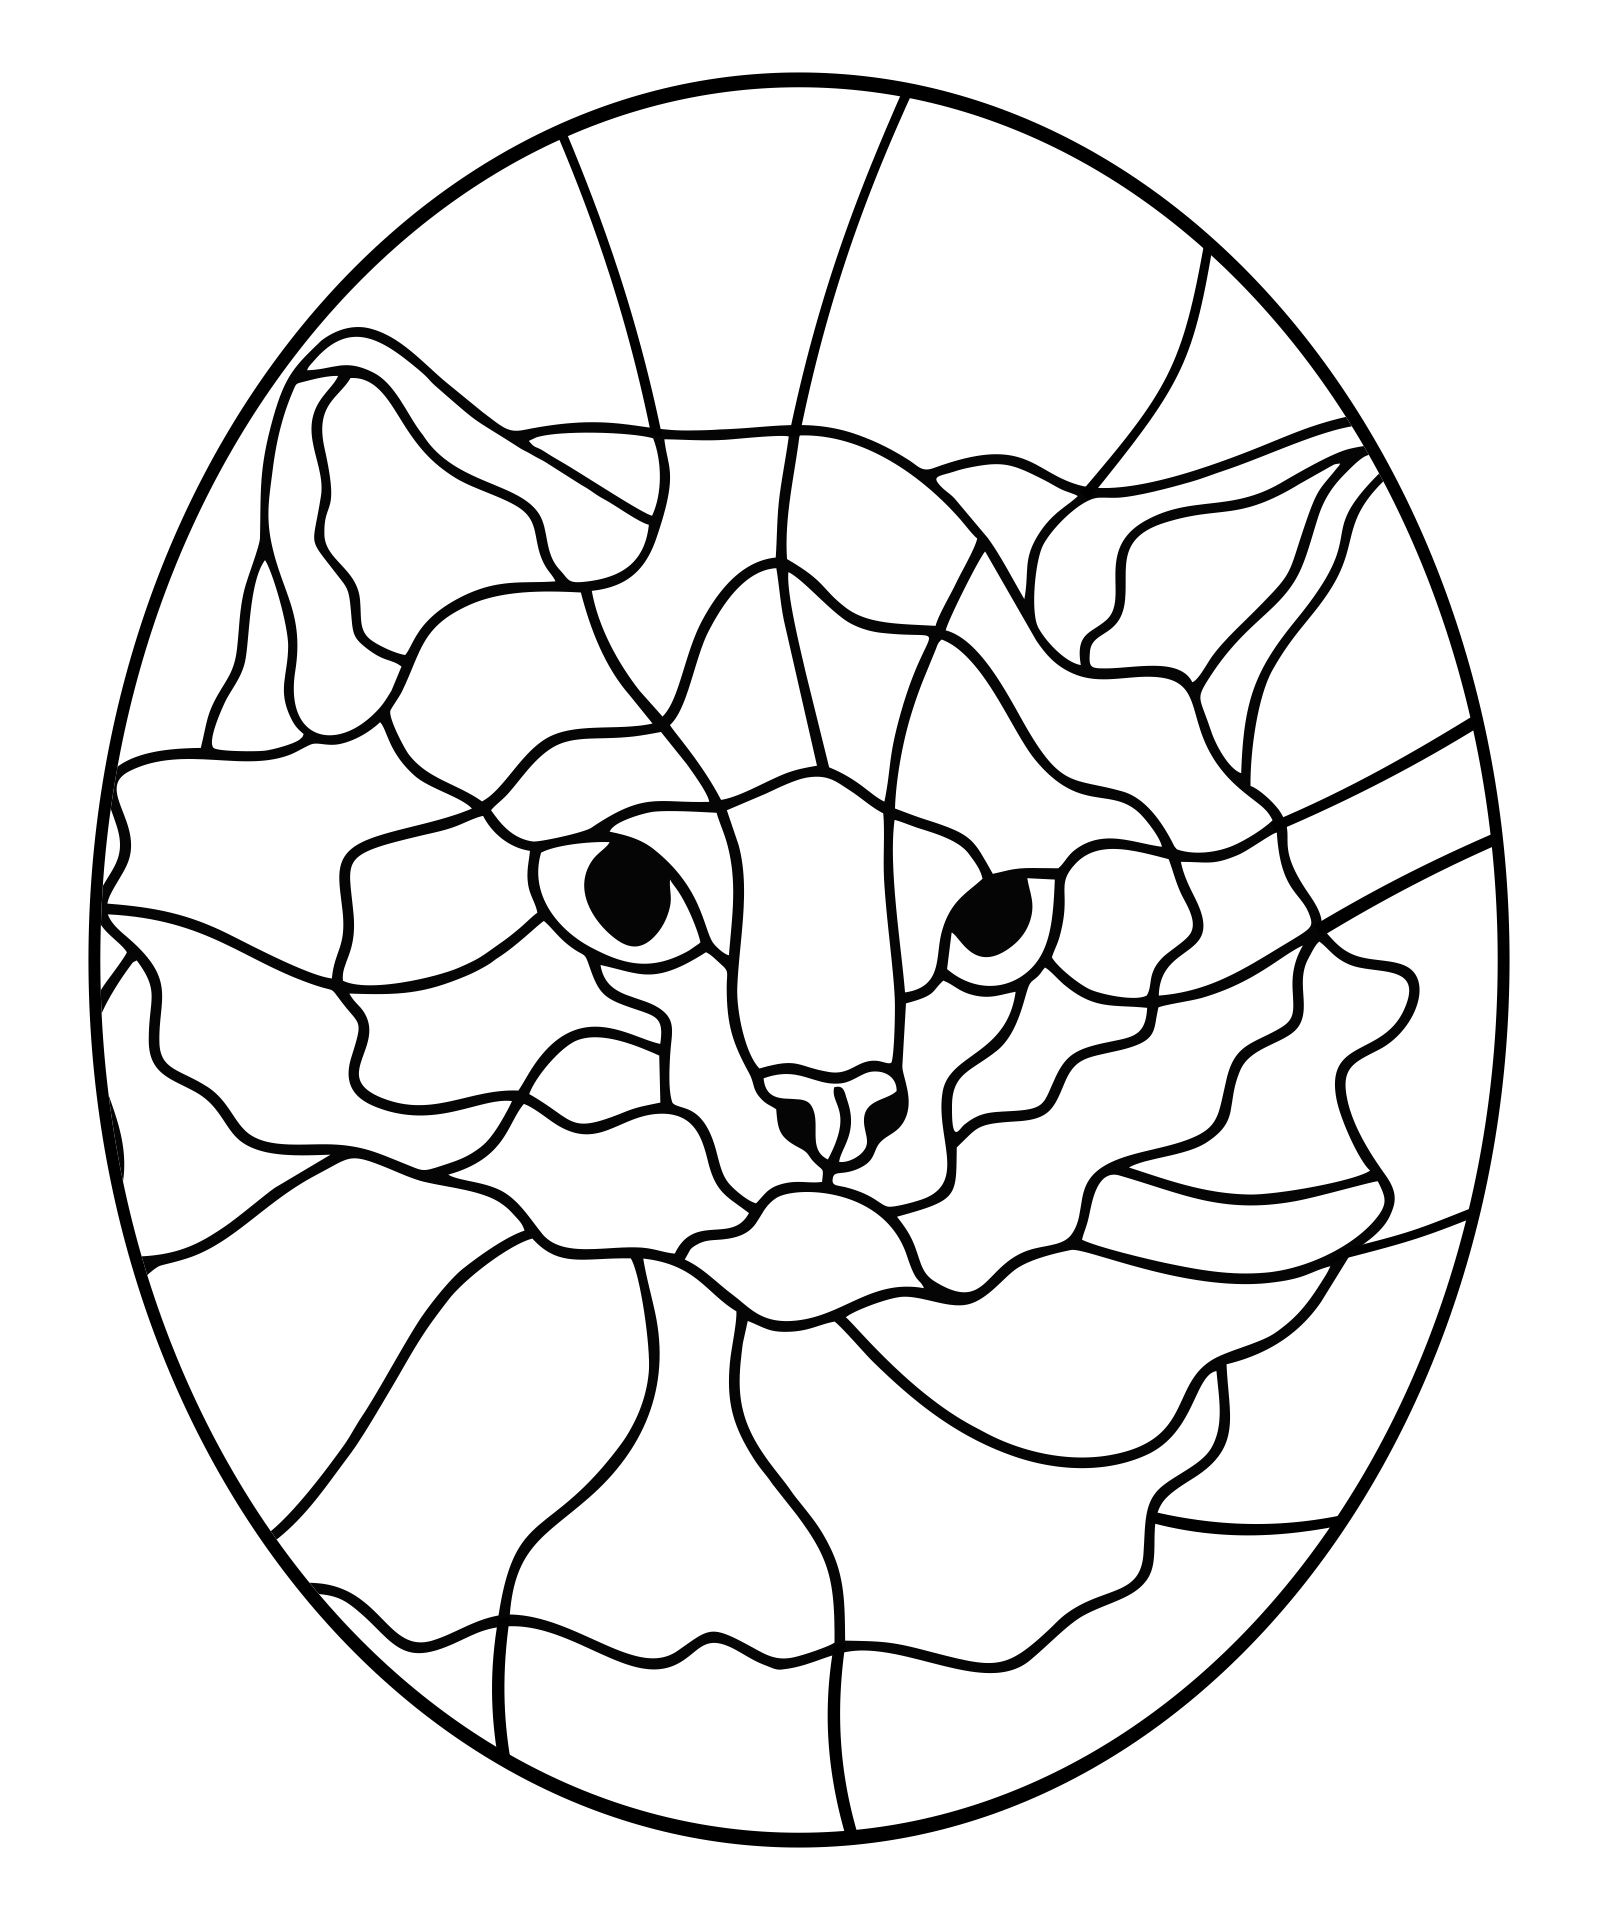 Cat Stained Glass Patterns